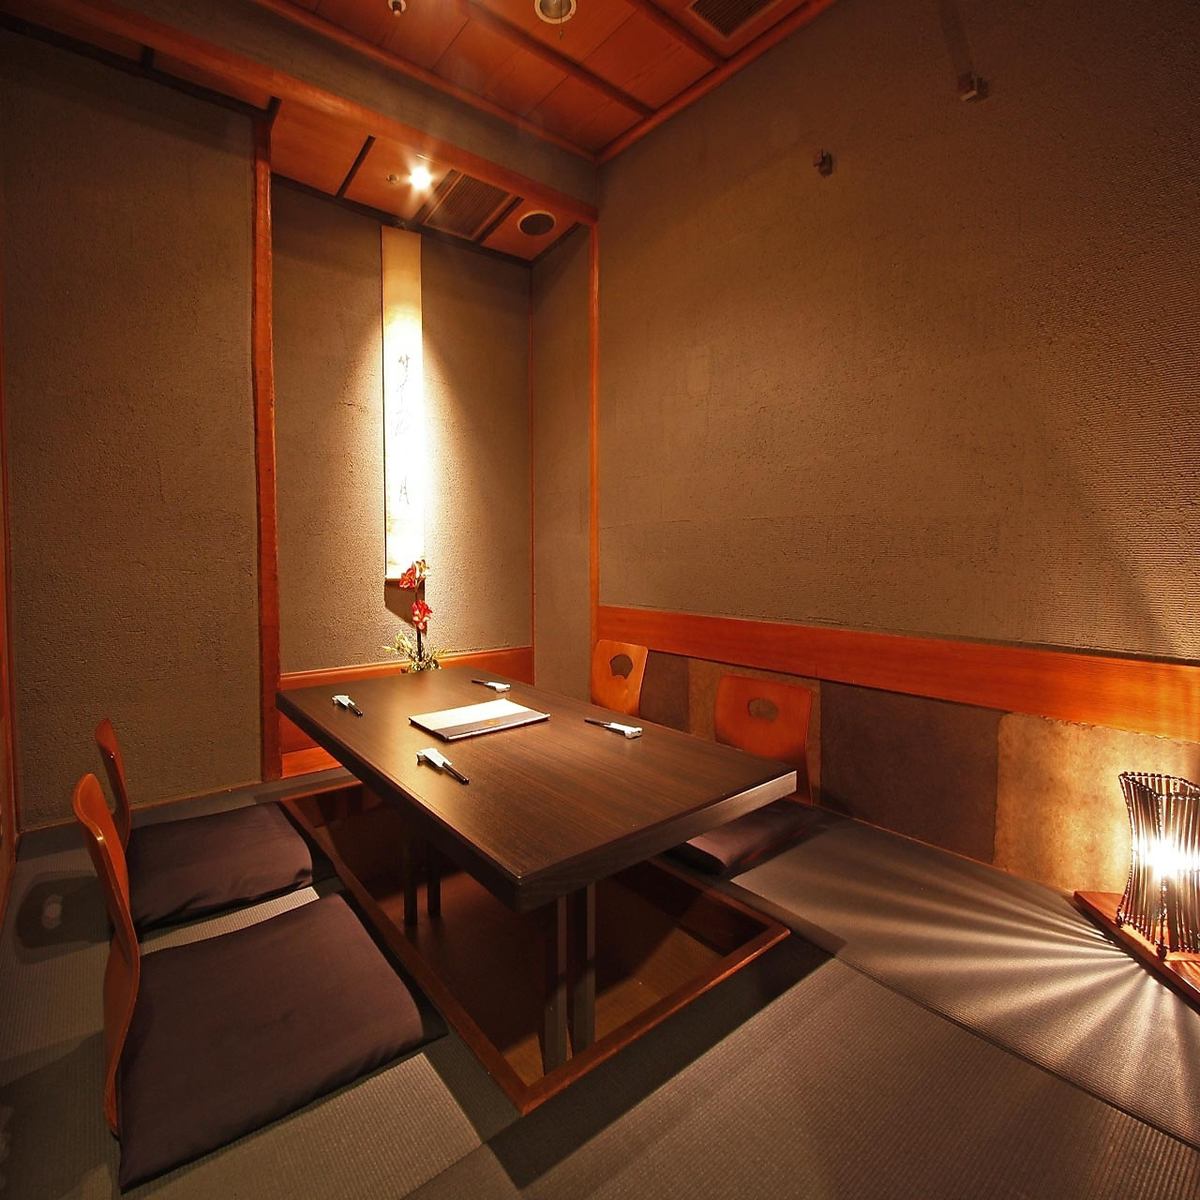 An important meal party is "adult's relaxing Japanese-style room" and "specialty dishes"